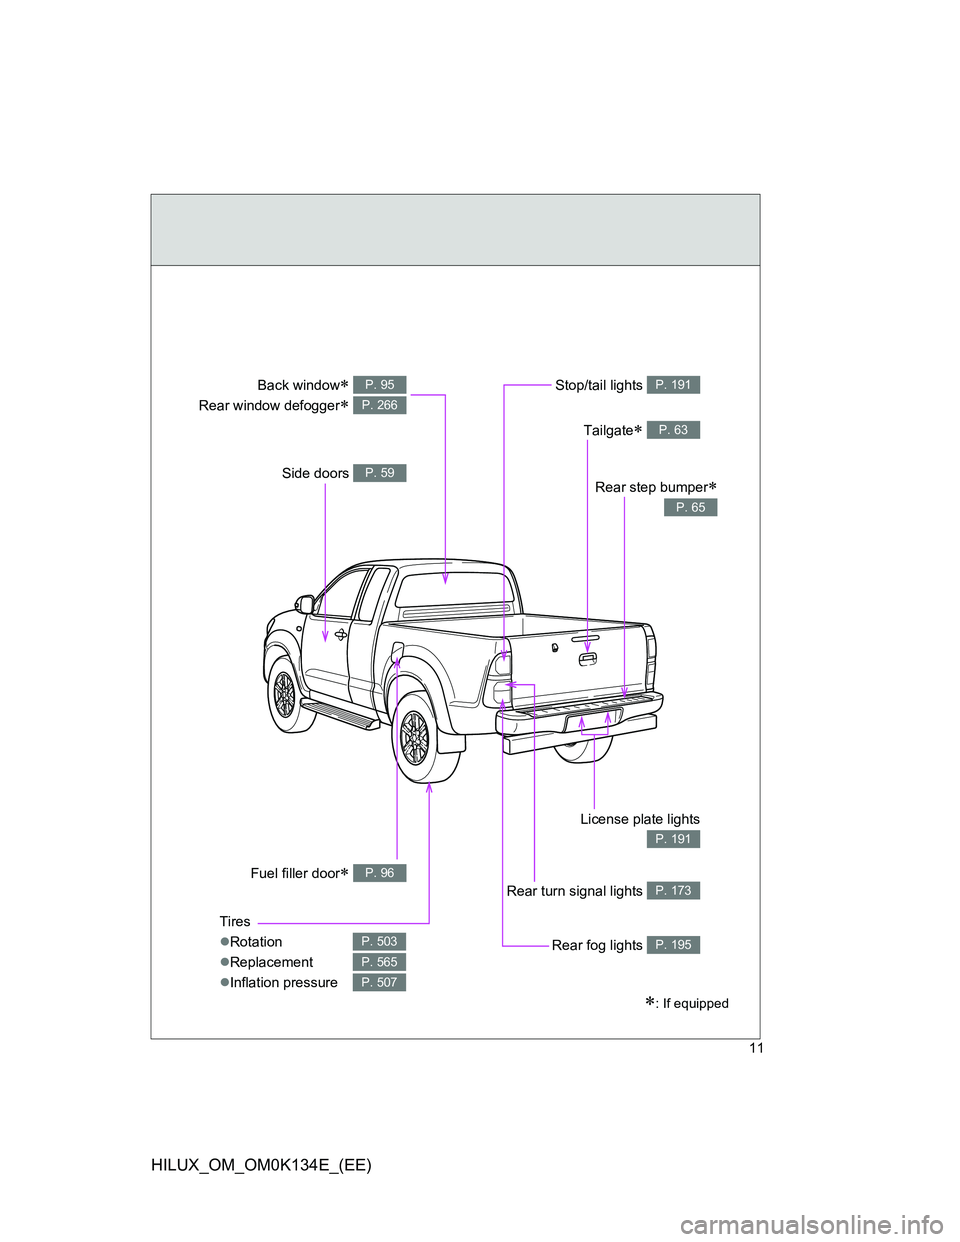 TOYOTA HILUX 2013  Owners Manual (in English) 11
HILUX_OM_OM0K134E_(EE)
Fuel filler door P. 96
Back window 
Rear window defogger
 
P. 95
P. 266
: If equipped
Stop/tail lights P. 191
Tailgate P. 63
Side doors P. 59
Tires
Rotation